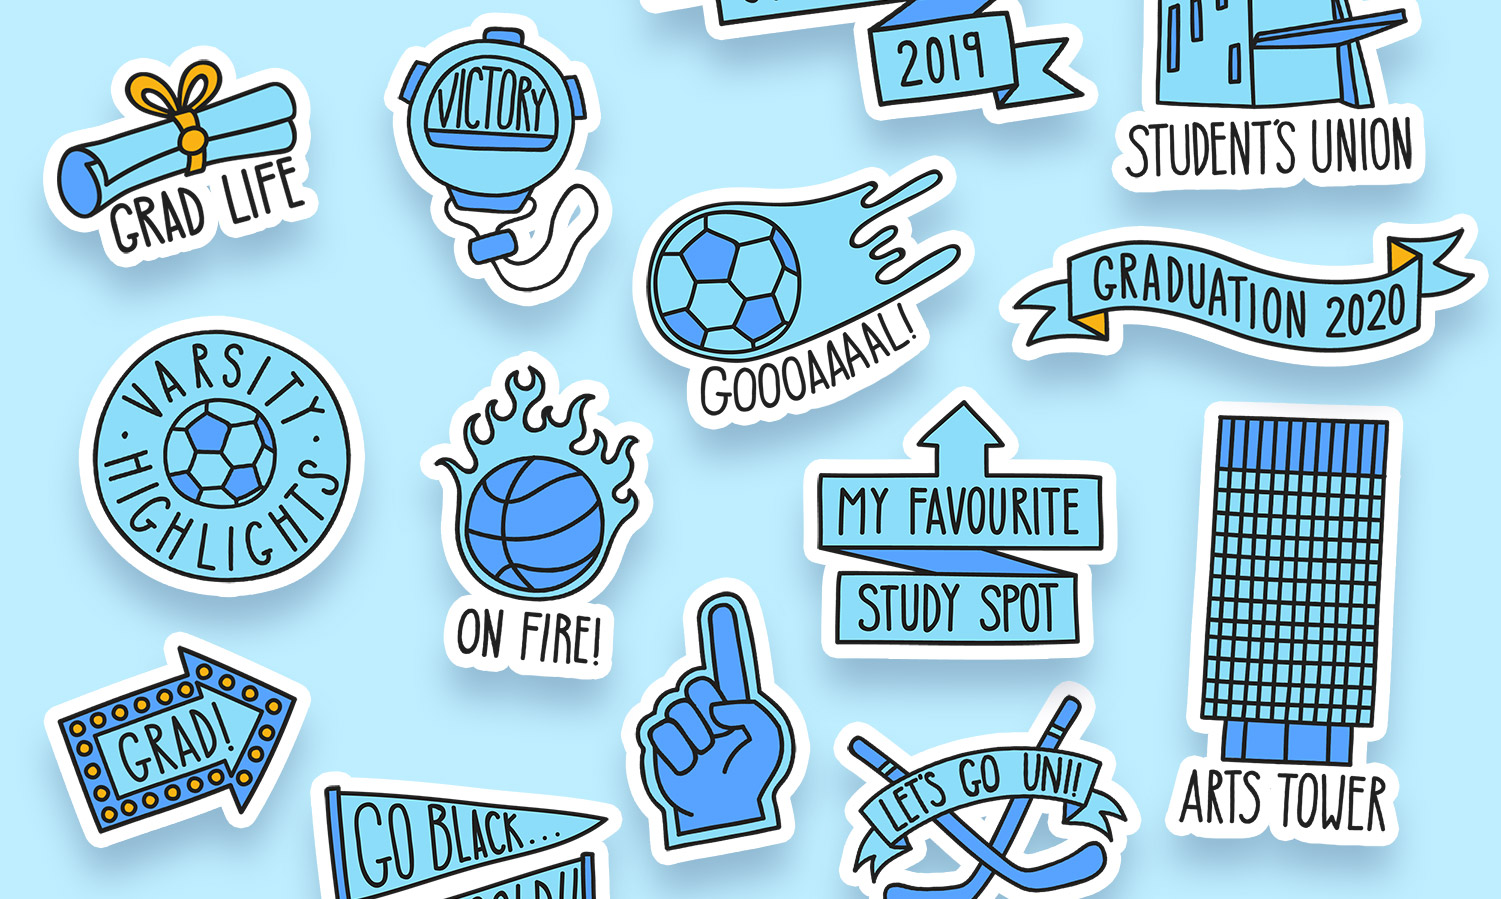 a collage of blue and yellow stickers, including illustrations of university buildings, flags and sports icons